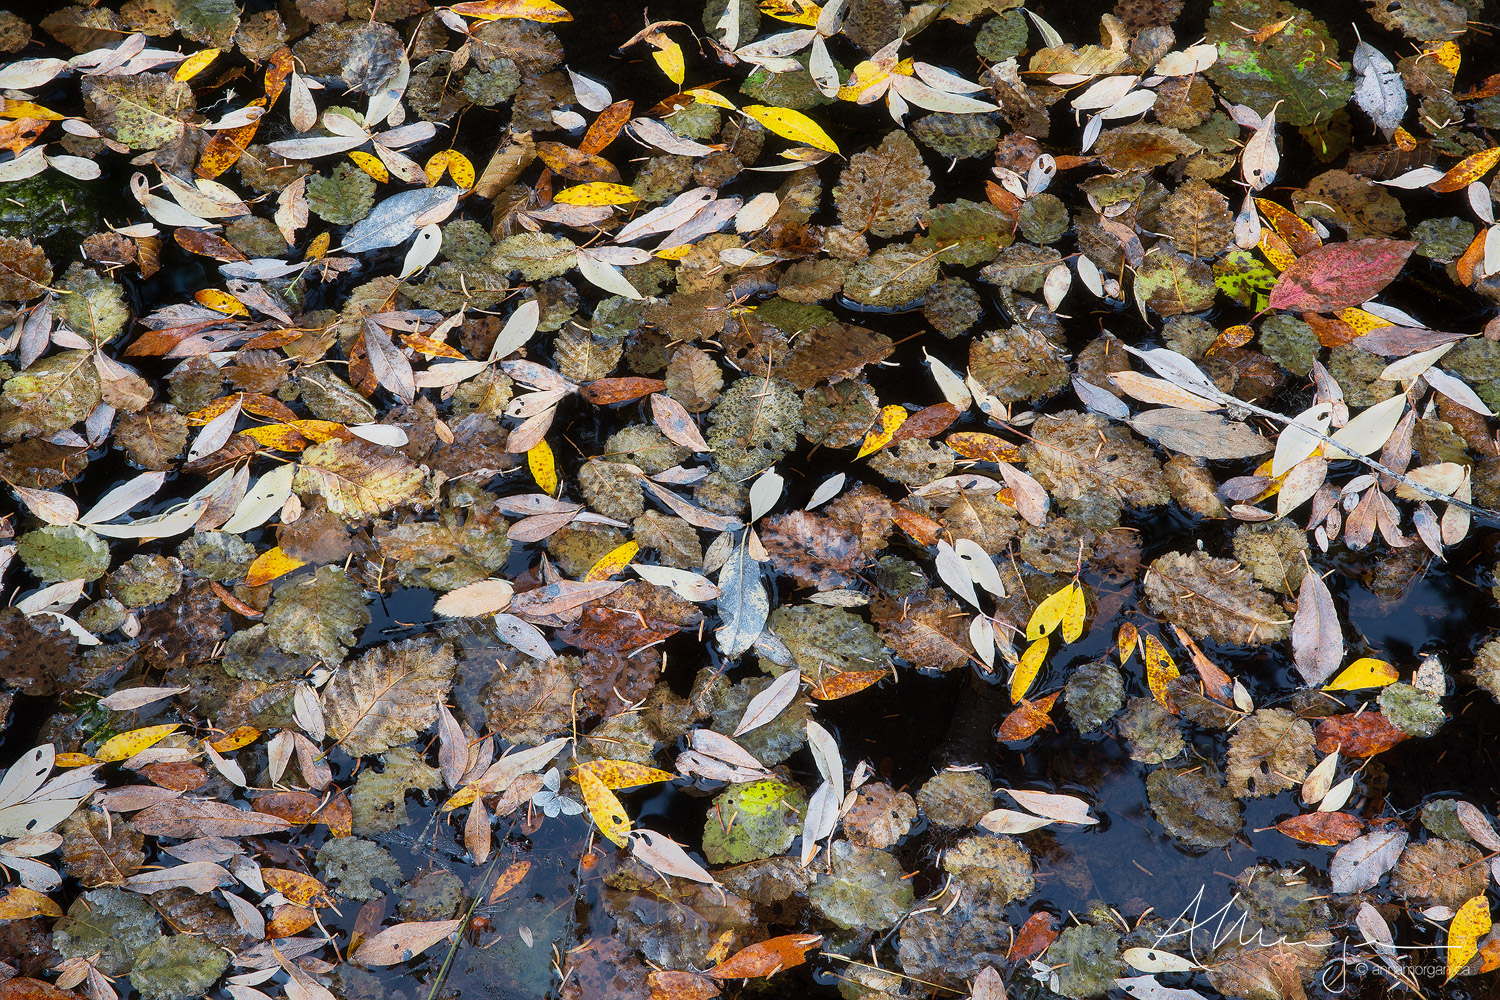 A stagnant pool filled with colourful autumn leaves and bodies of dead insects.